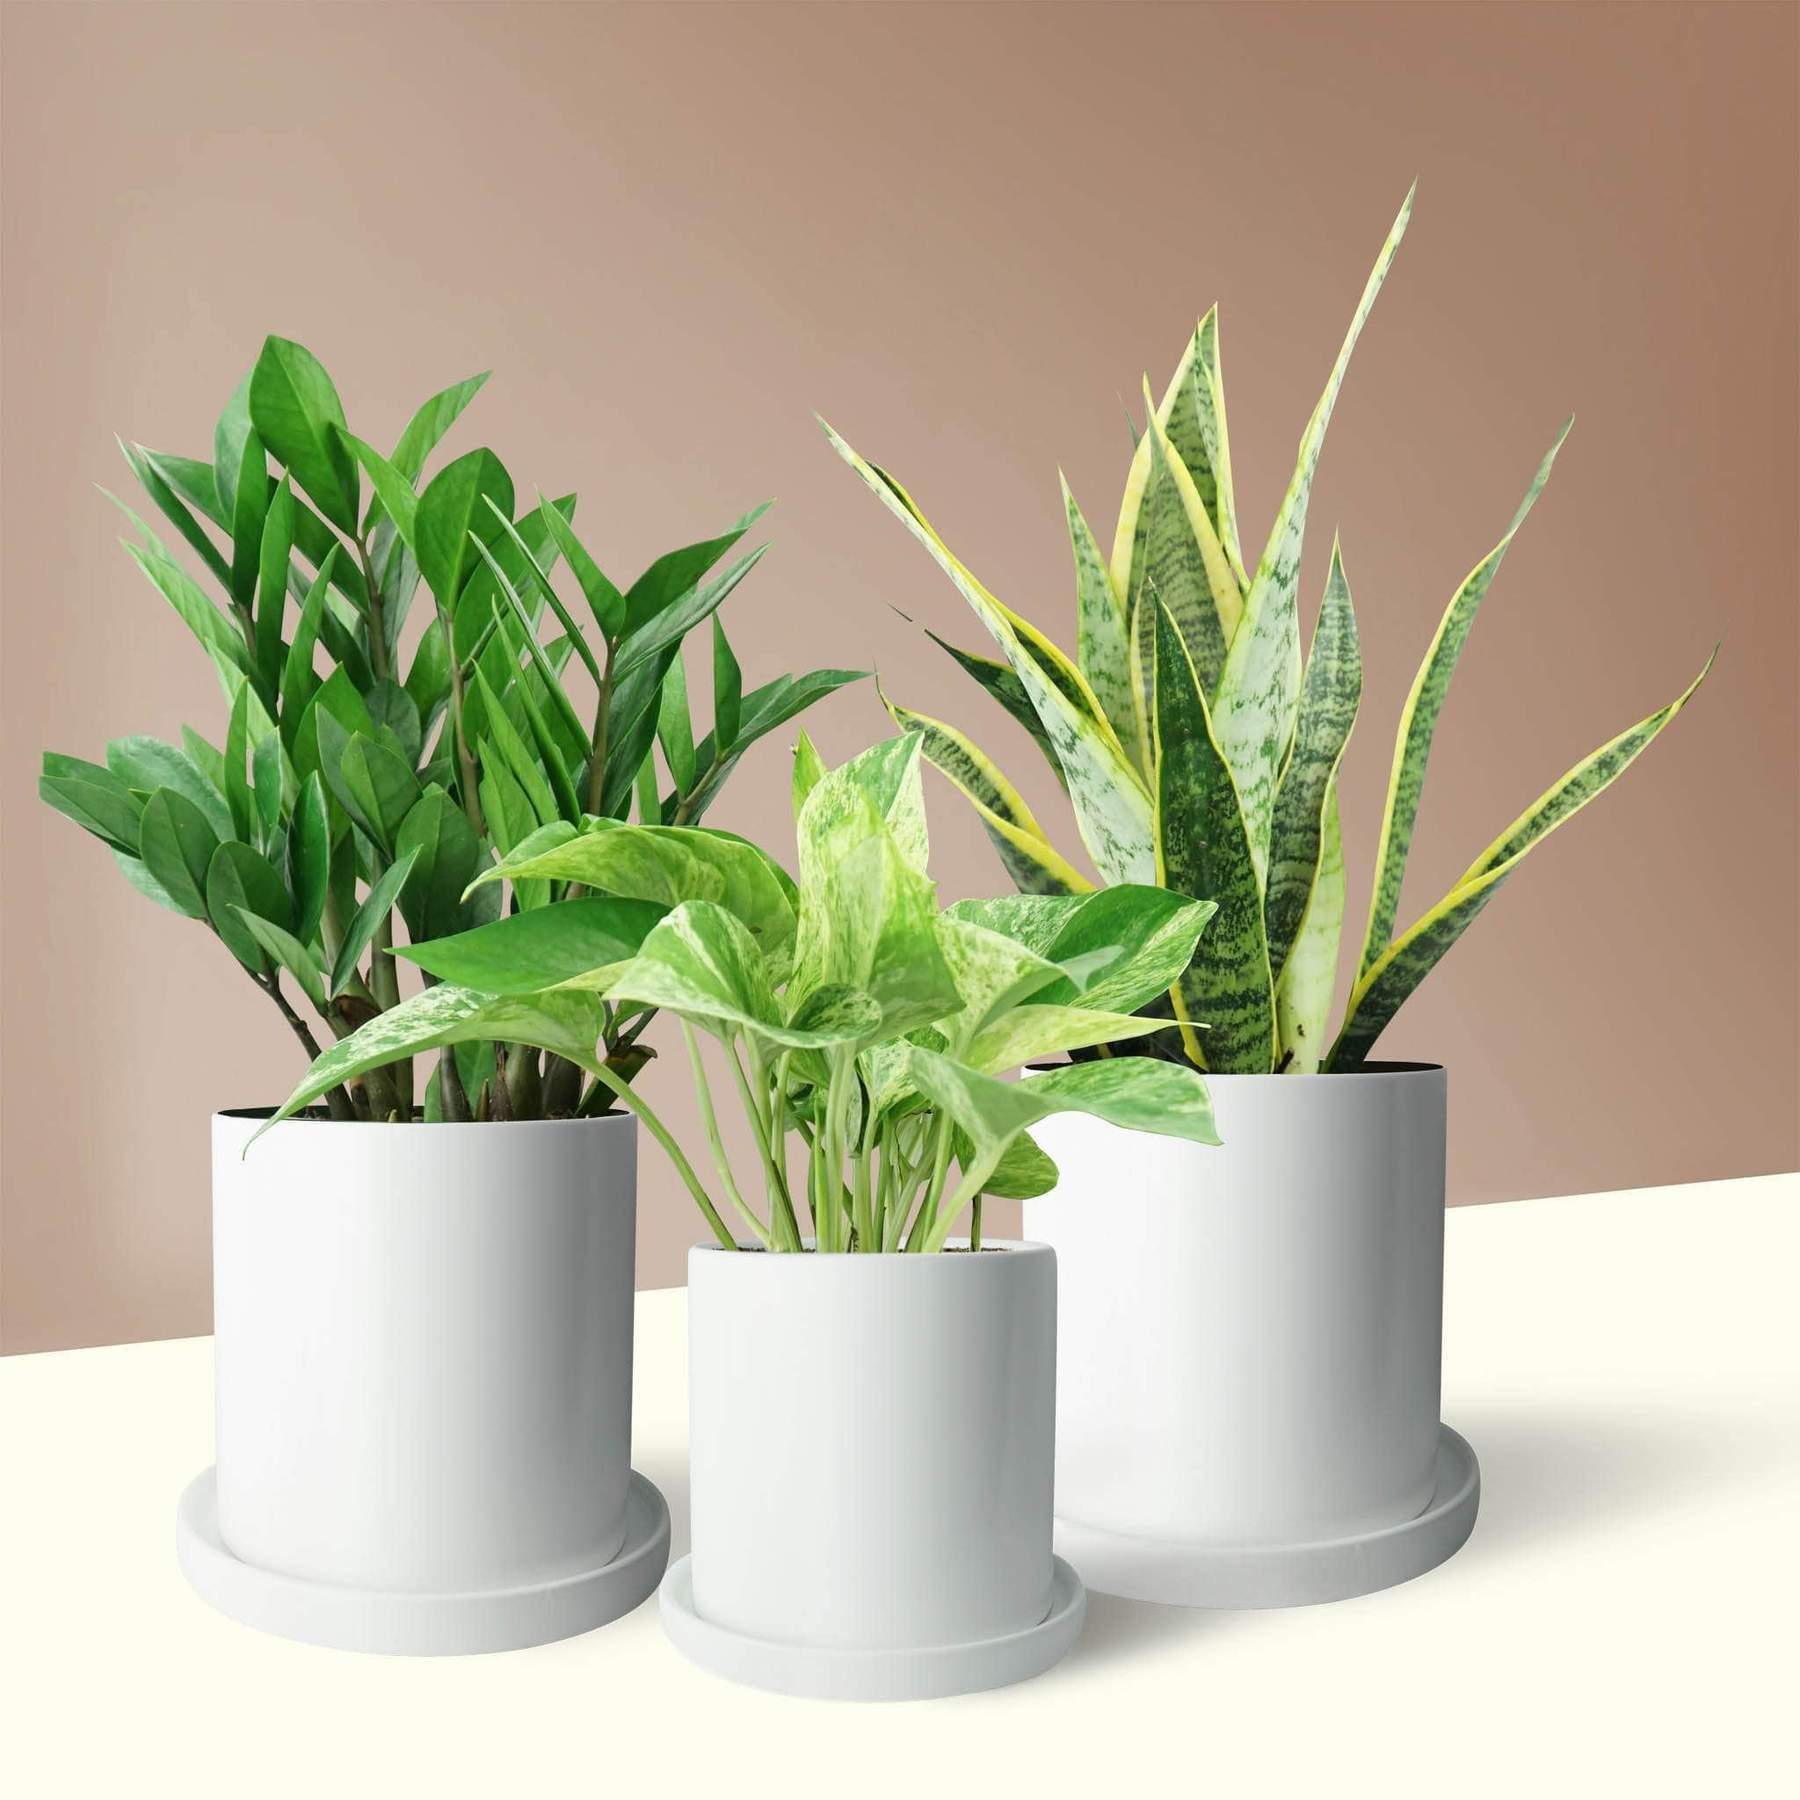 How Hard Is It to Take Care of Indoor Plants?